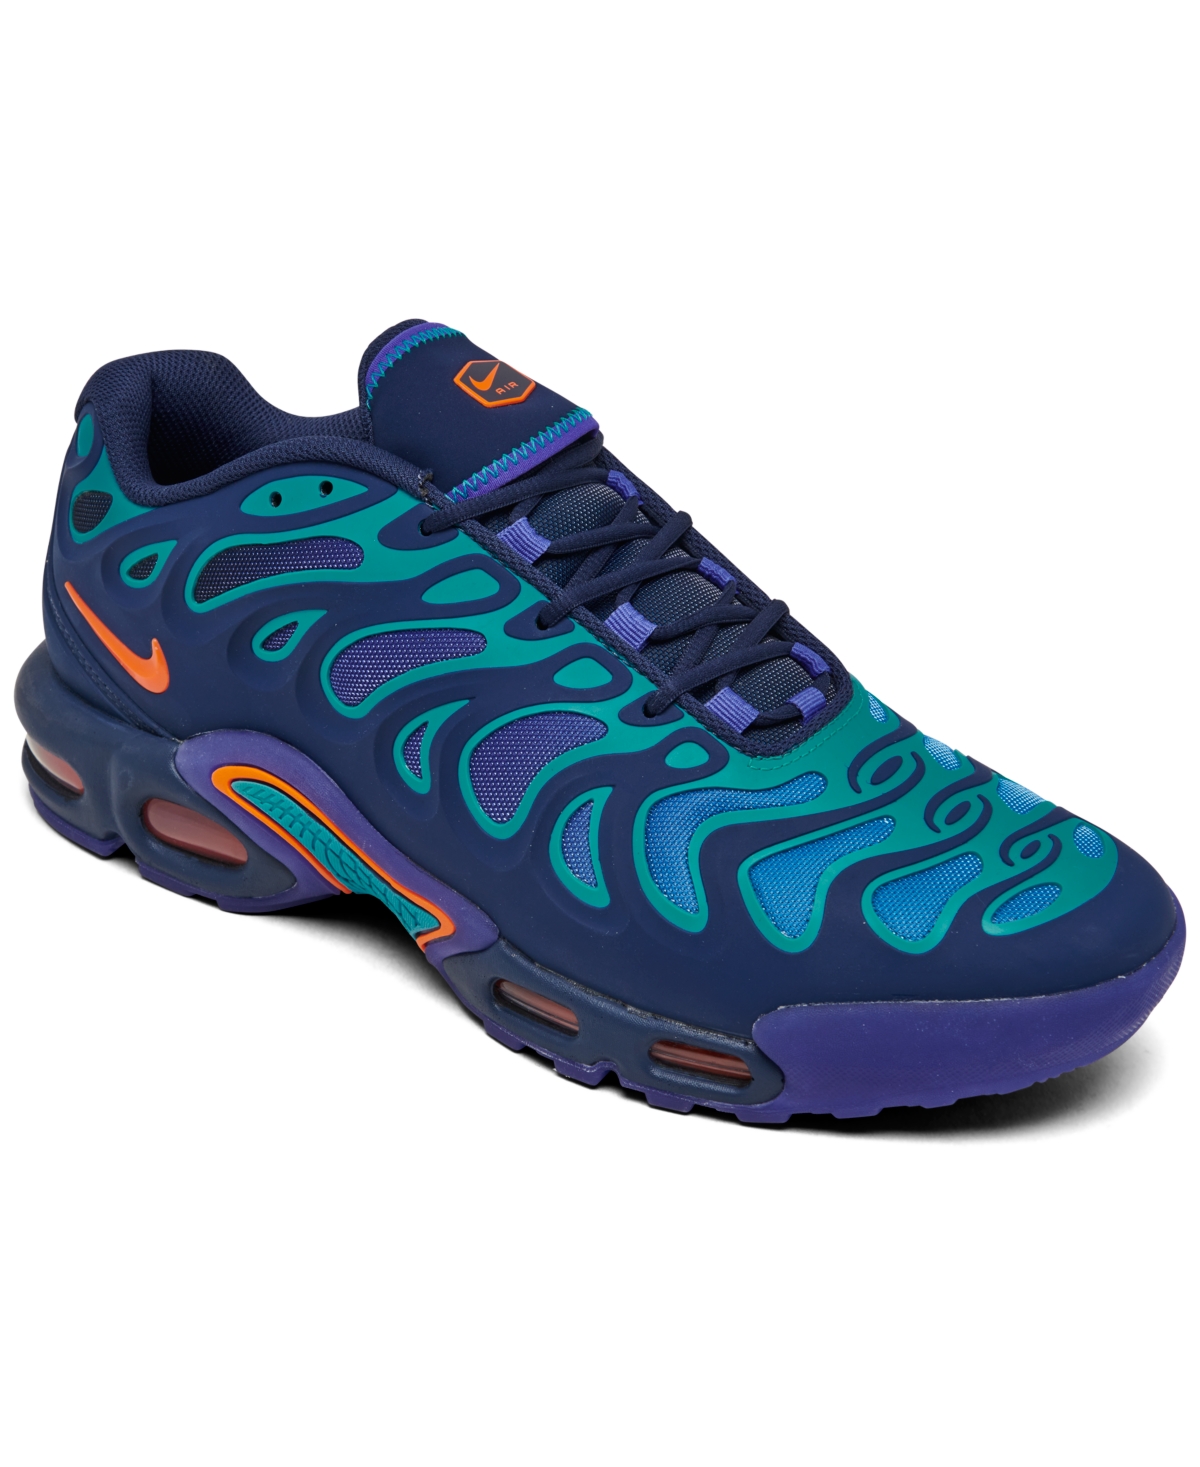 Men's Air Max Plus Drift Casual Sneakers from Finish Line - Blue/Purple/Orange